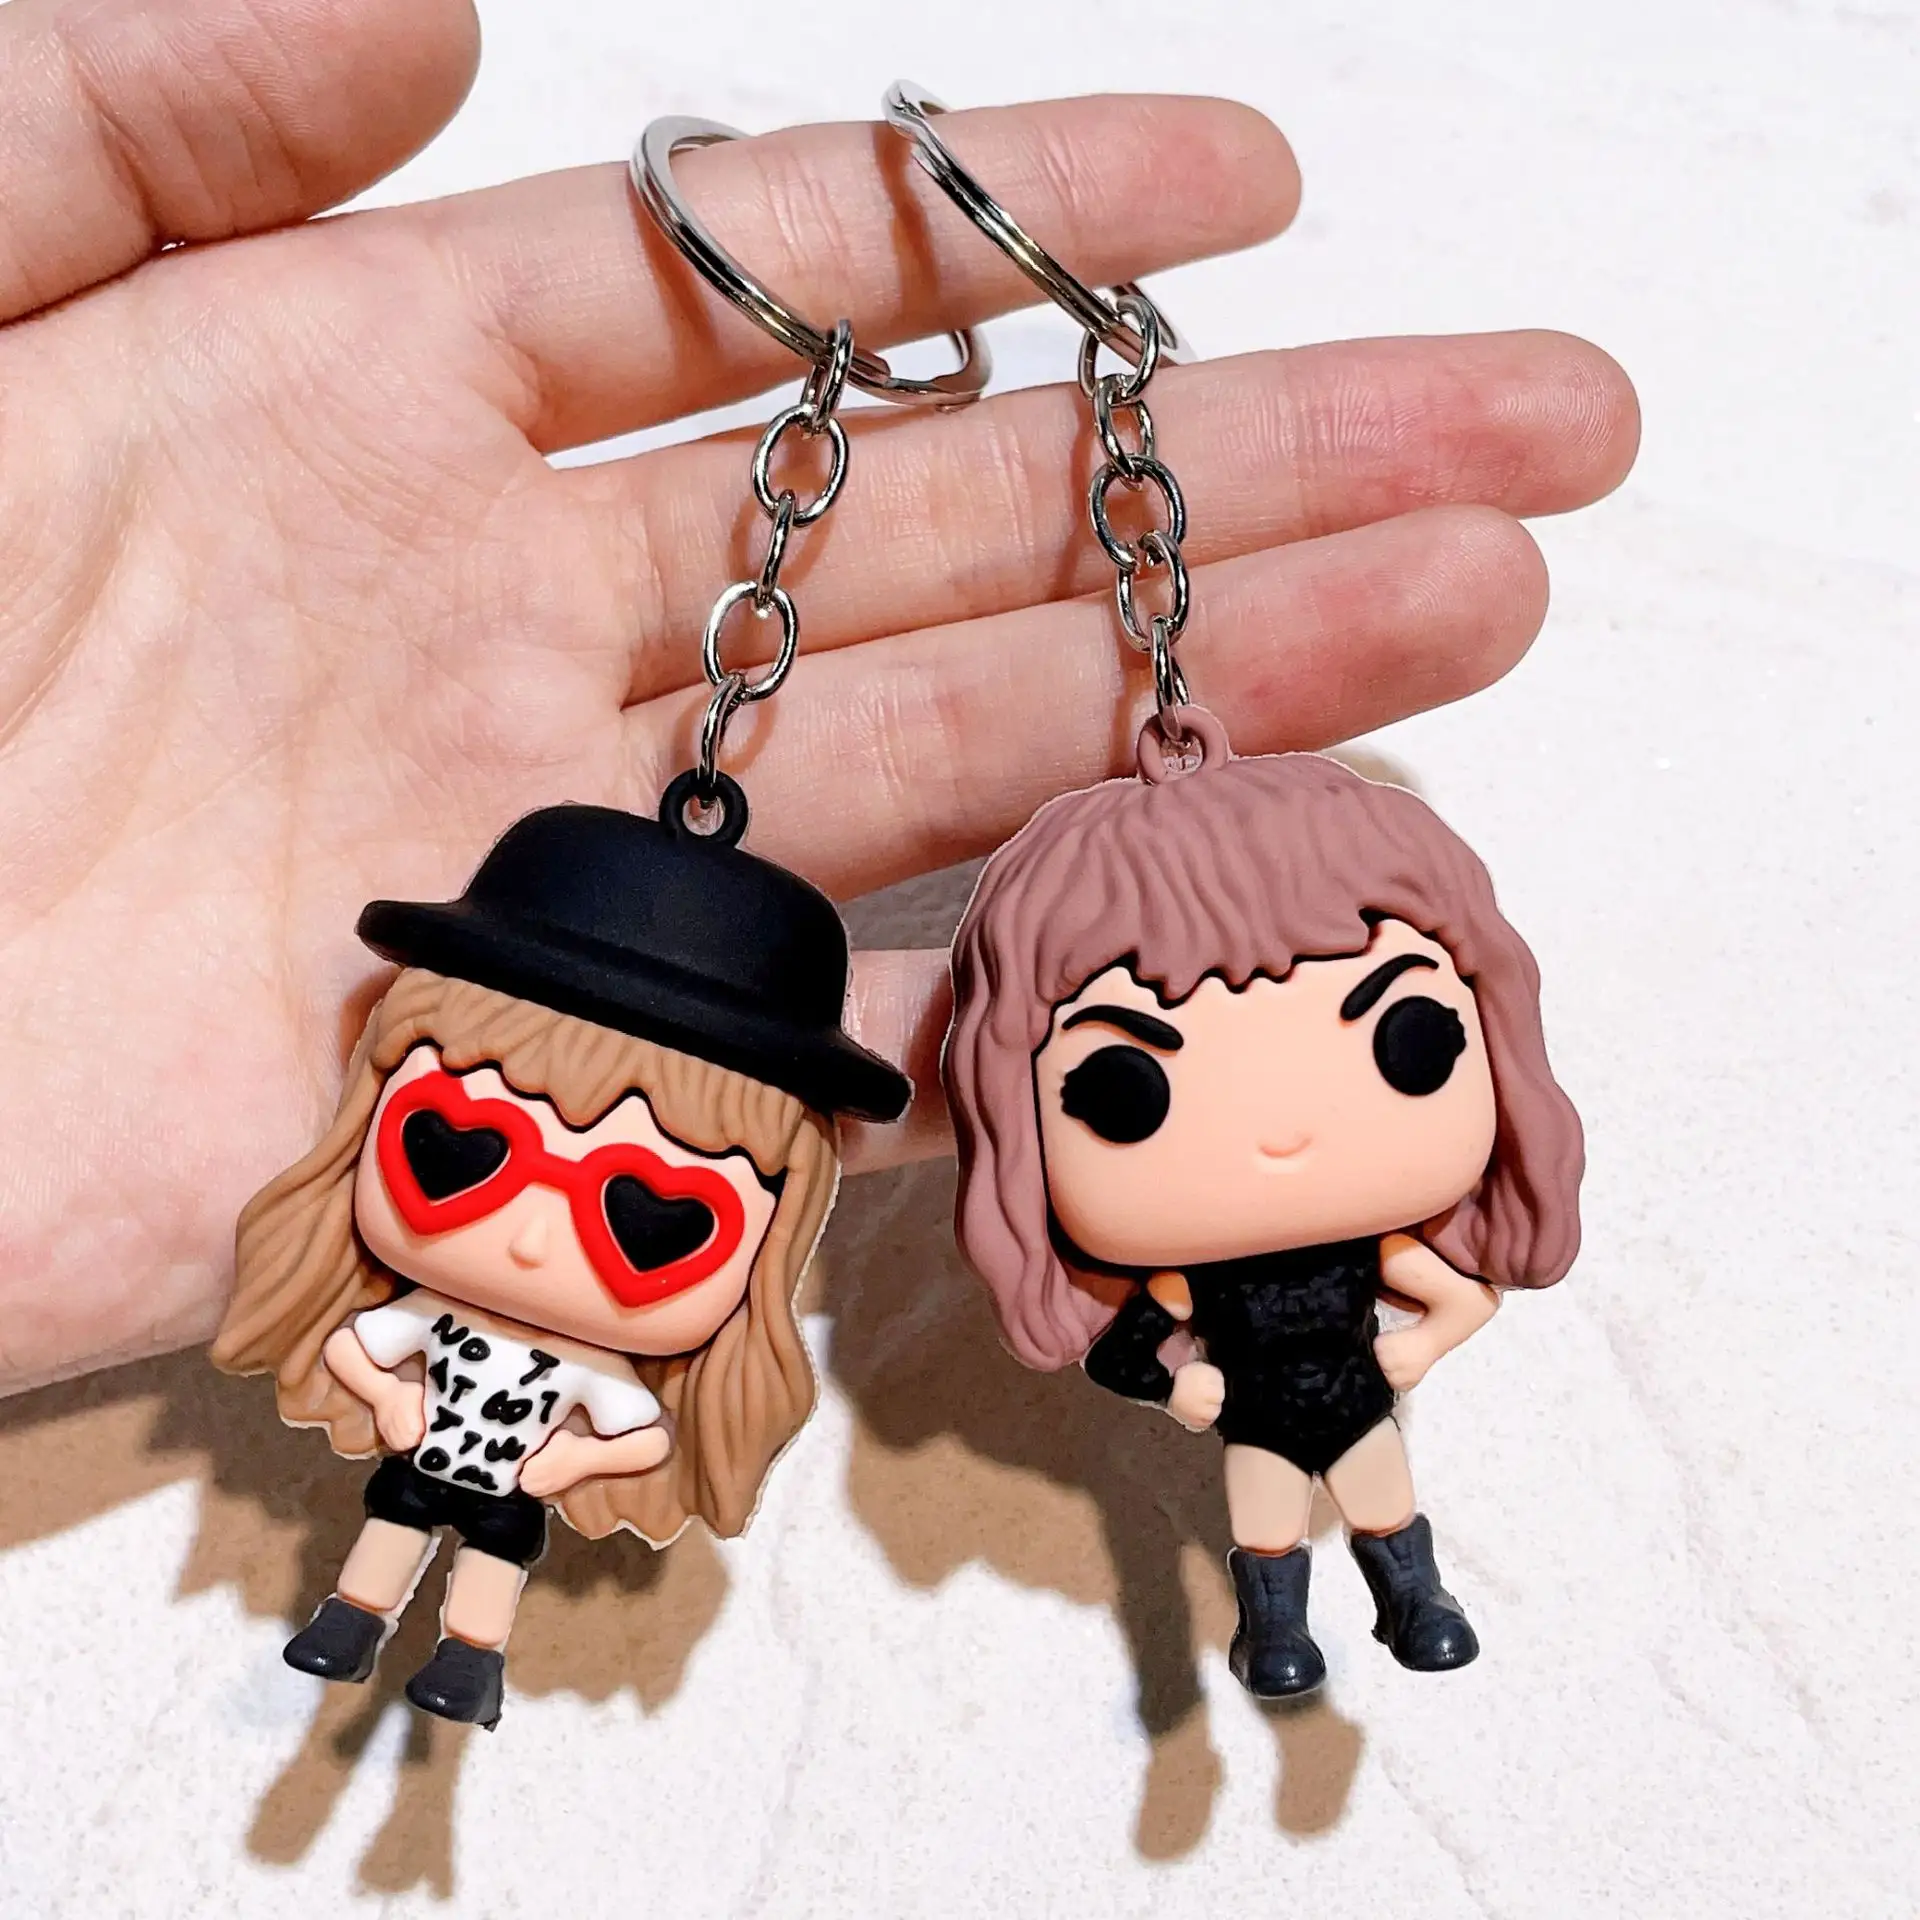 Fans Gift Jewelry Silicone Swift Figure Keychain For Men Women Car Backpack Pendant Keychain Singer 1989 Taylor Keychains